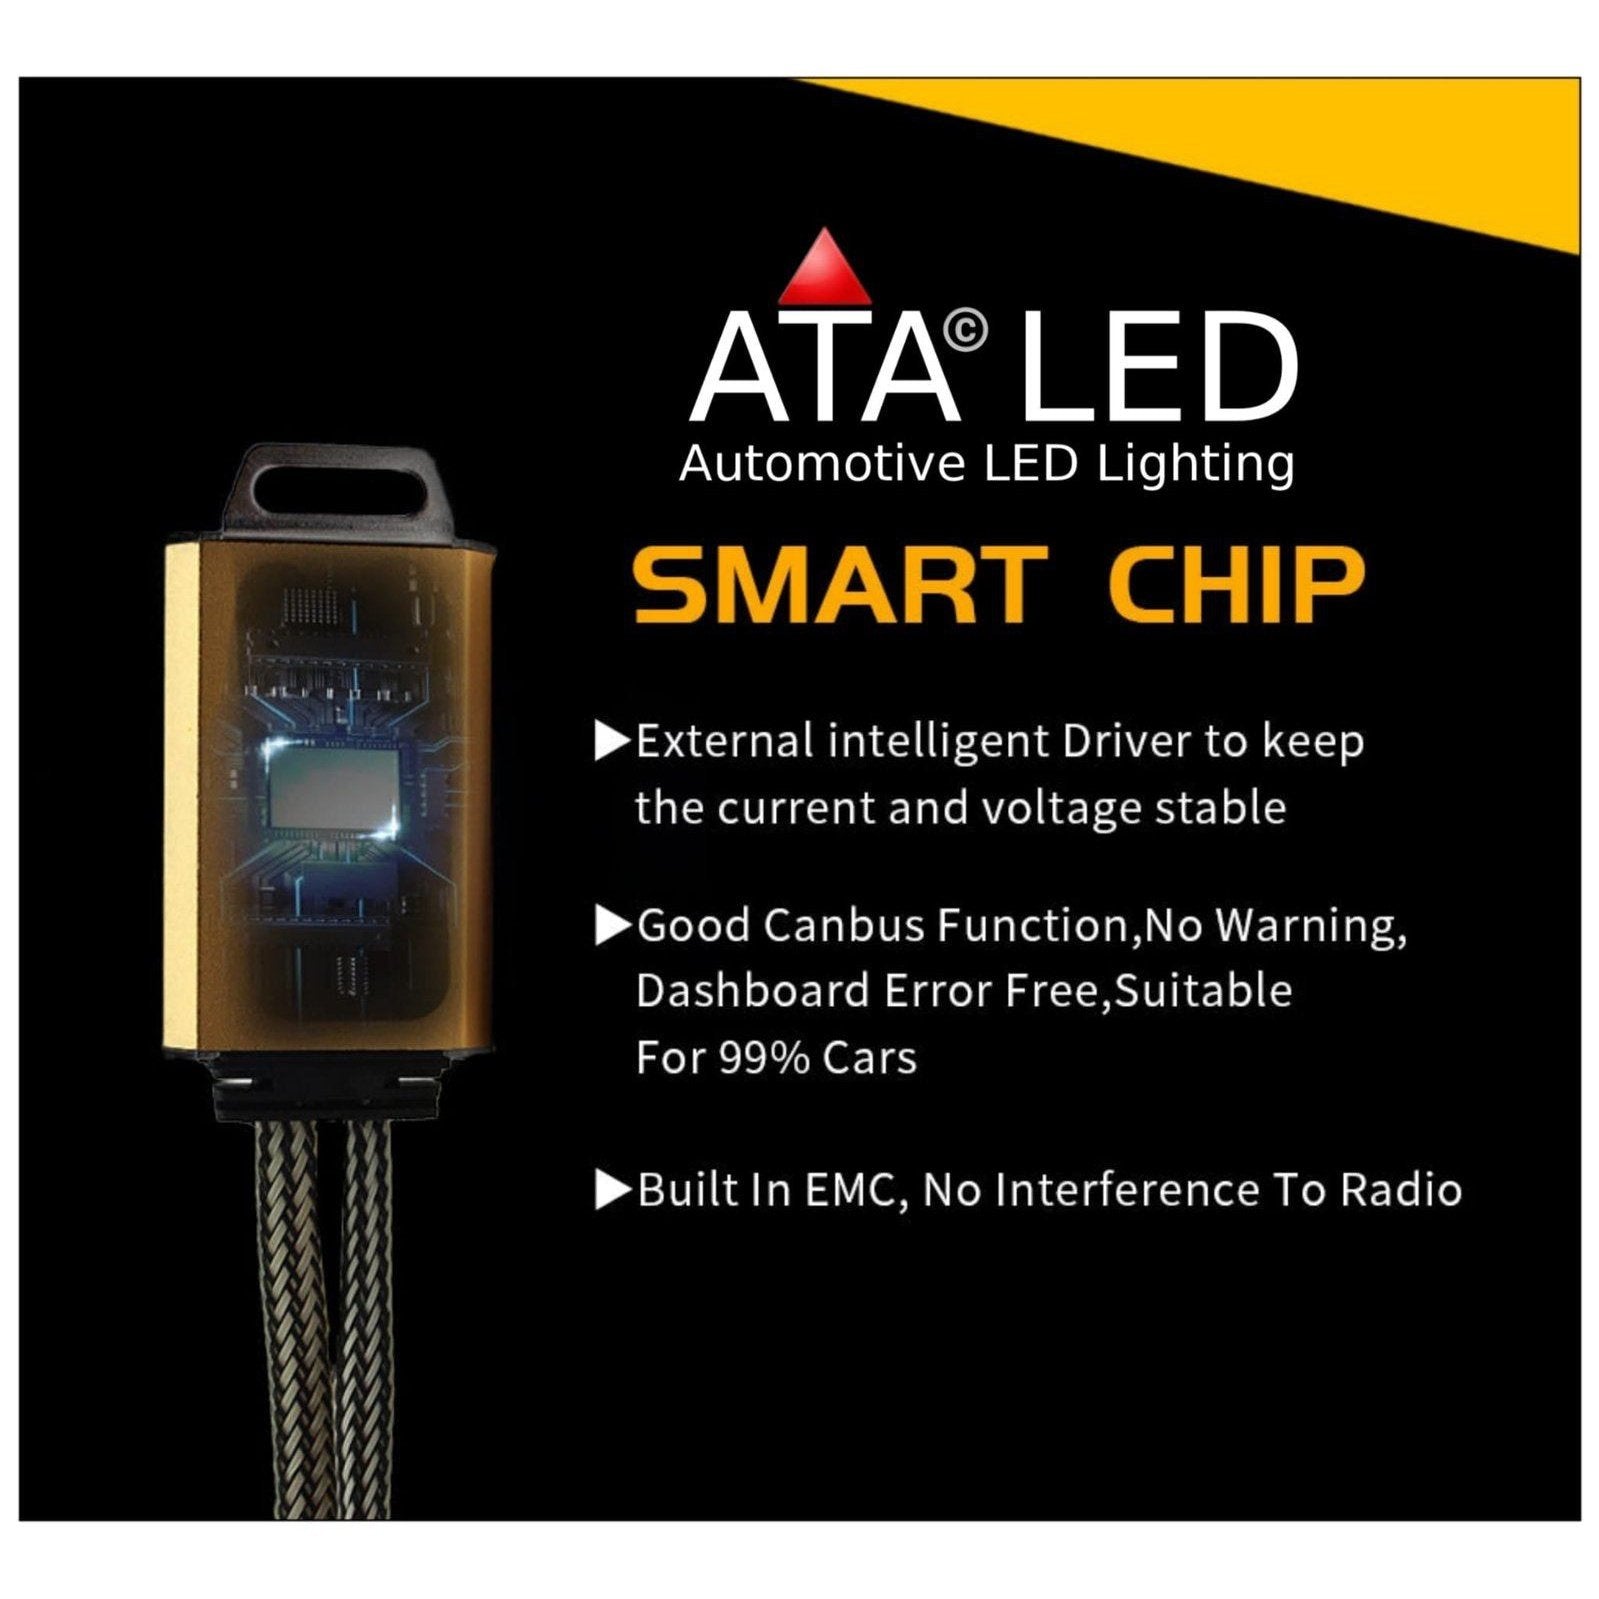 H11 H8 H9 R8 Smart Chip External intelligent driver to keep the current and voltage stable Good canbus function No warning Dashboard Error Free Suitable For 99% Cars Built in EMC NO interference to radio